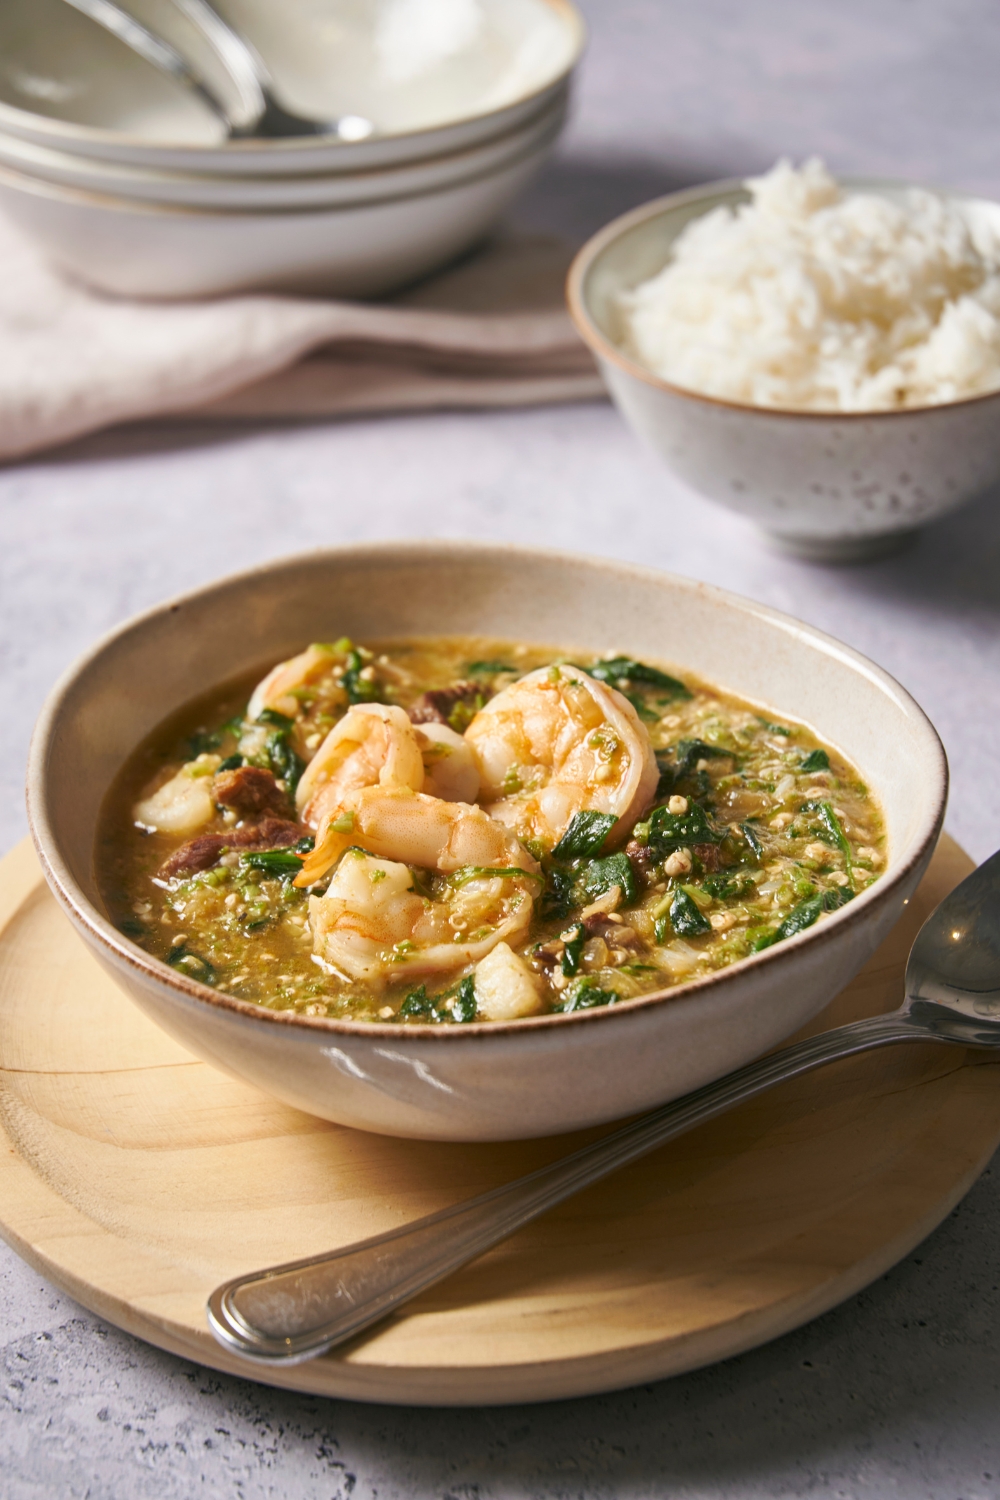 Three pieces of shrimp on top of okra soup in a bowl. Behind it is part of a bowl of white rice.